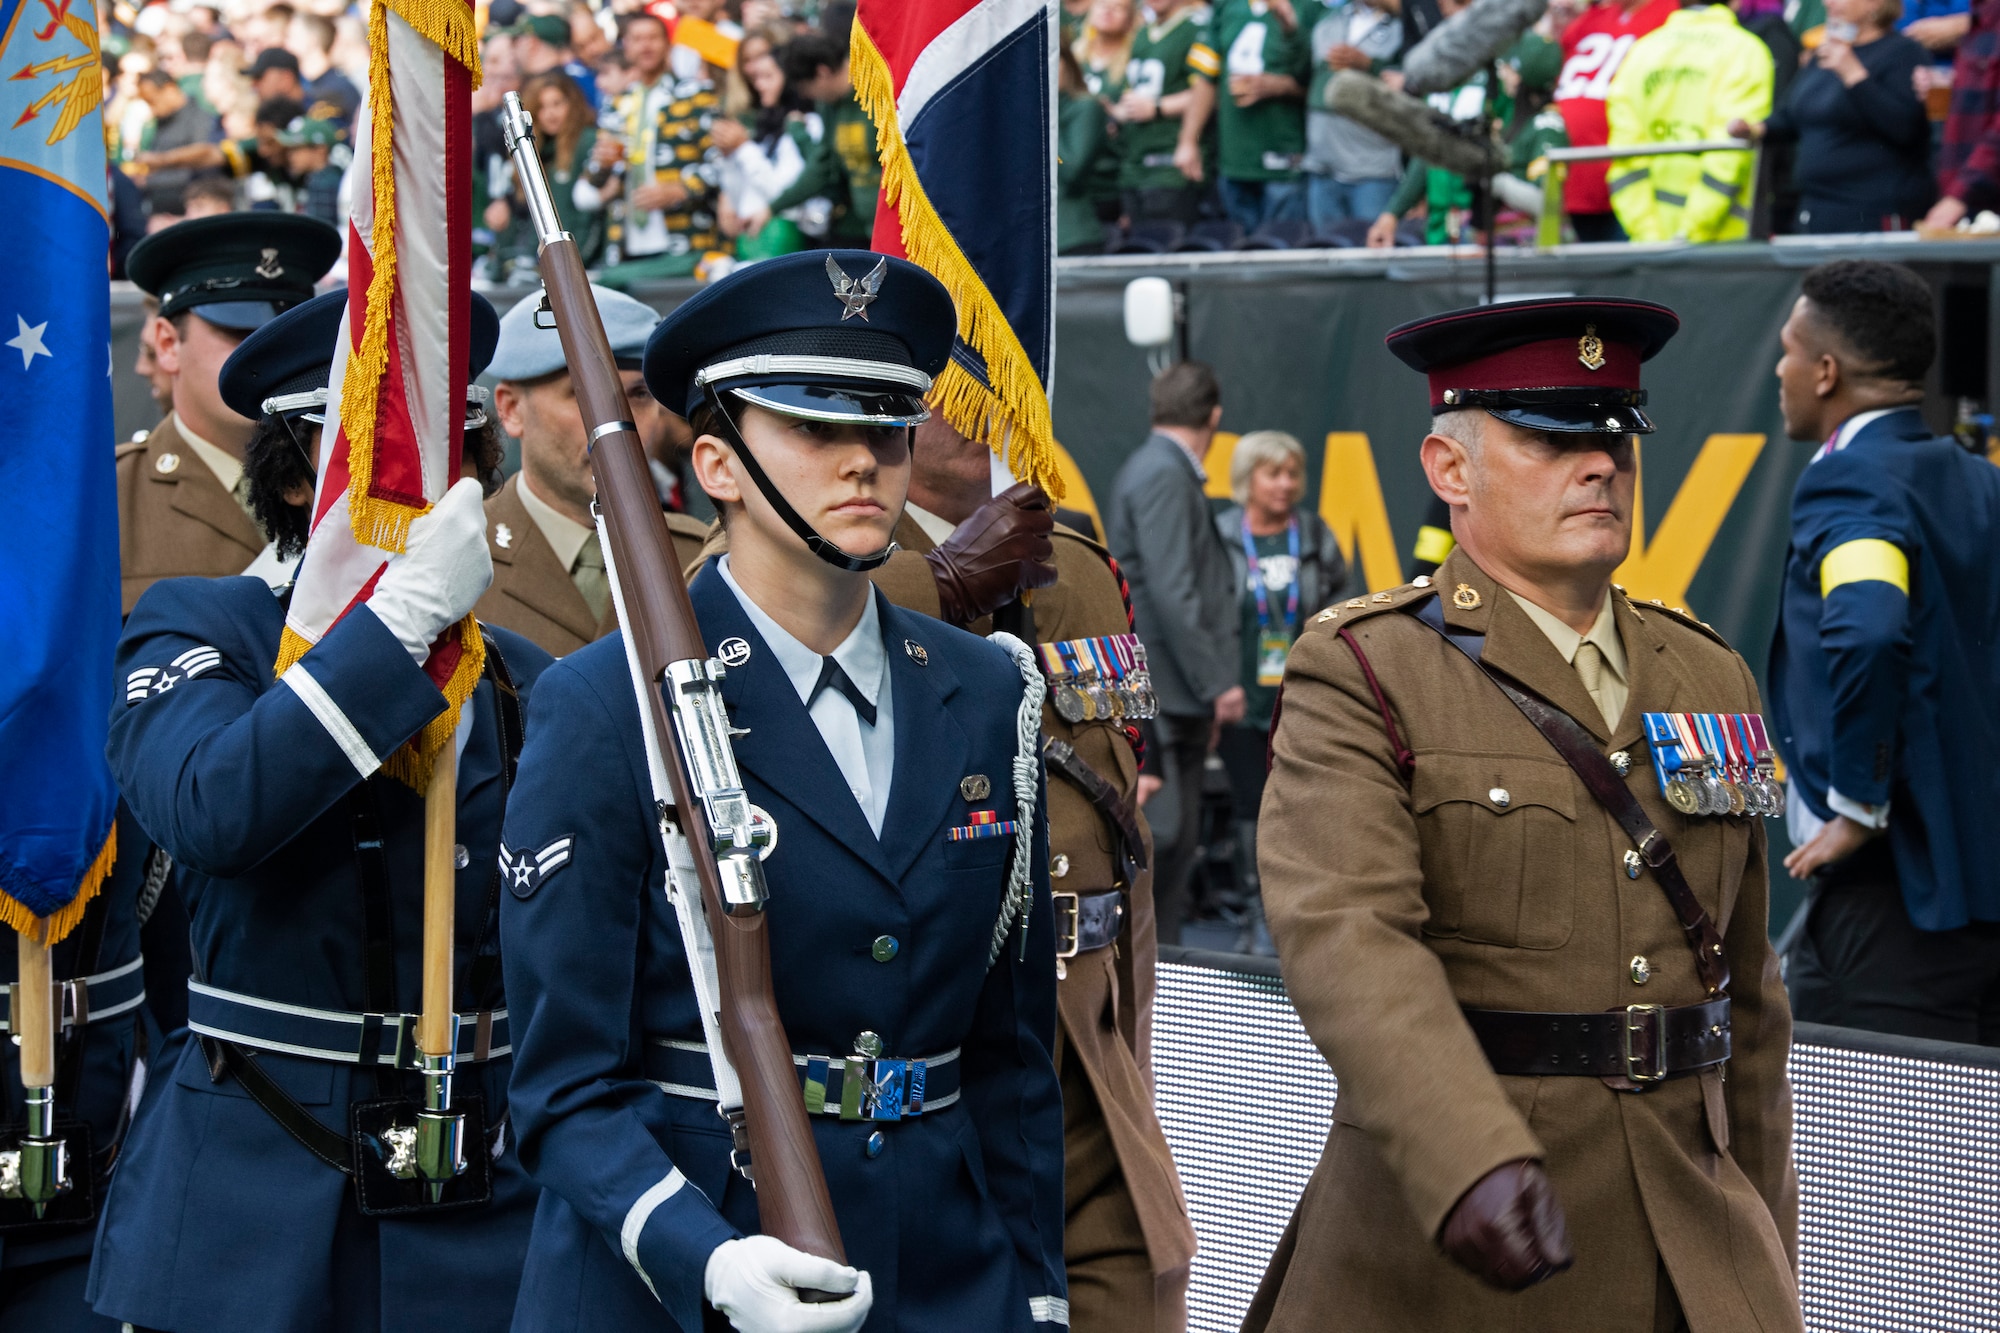 U.S. Air Force Airman 1st Class Olivia Gibson, 48th Fighter Wing honor guardsman, marches off the field with a U.K. Armed Forces color guard team after the pre-game ceremony of the National Football League’s New York Giants vs. Green Bay Packers game at Tottenham Hotspur Stadium, in London, England, Oct. 9, 2022. The pre-game ceremony featured more than 50 Airmen unfurling the flag along with an honor guard team and vocalist to sing the U.S. National Anthem. (U.S. Air Force photo by Tech. Sgt. Anthony Hetlage)